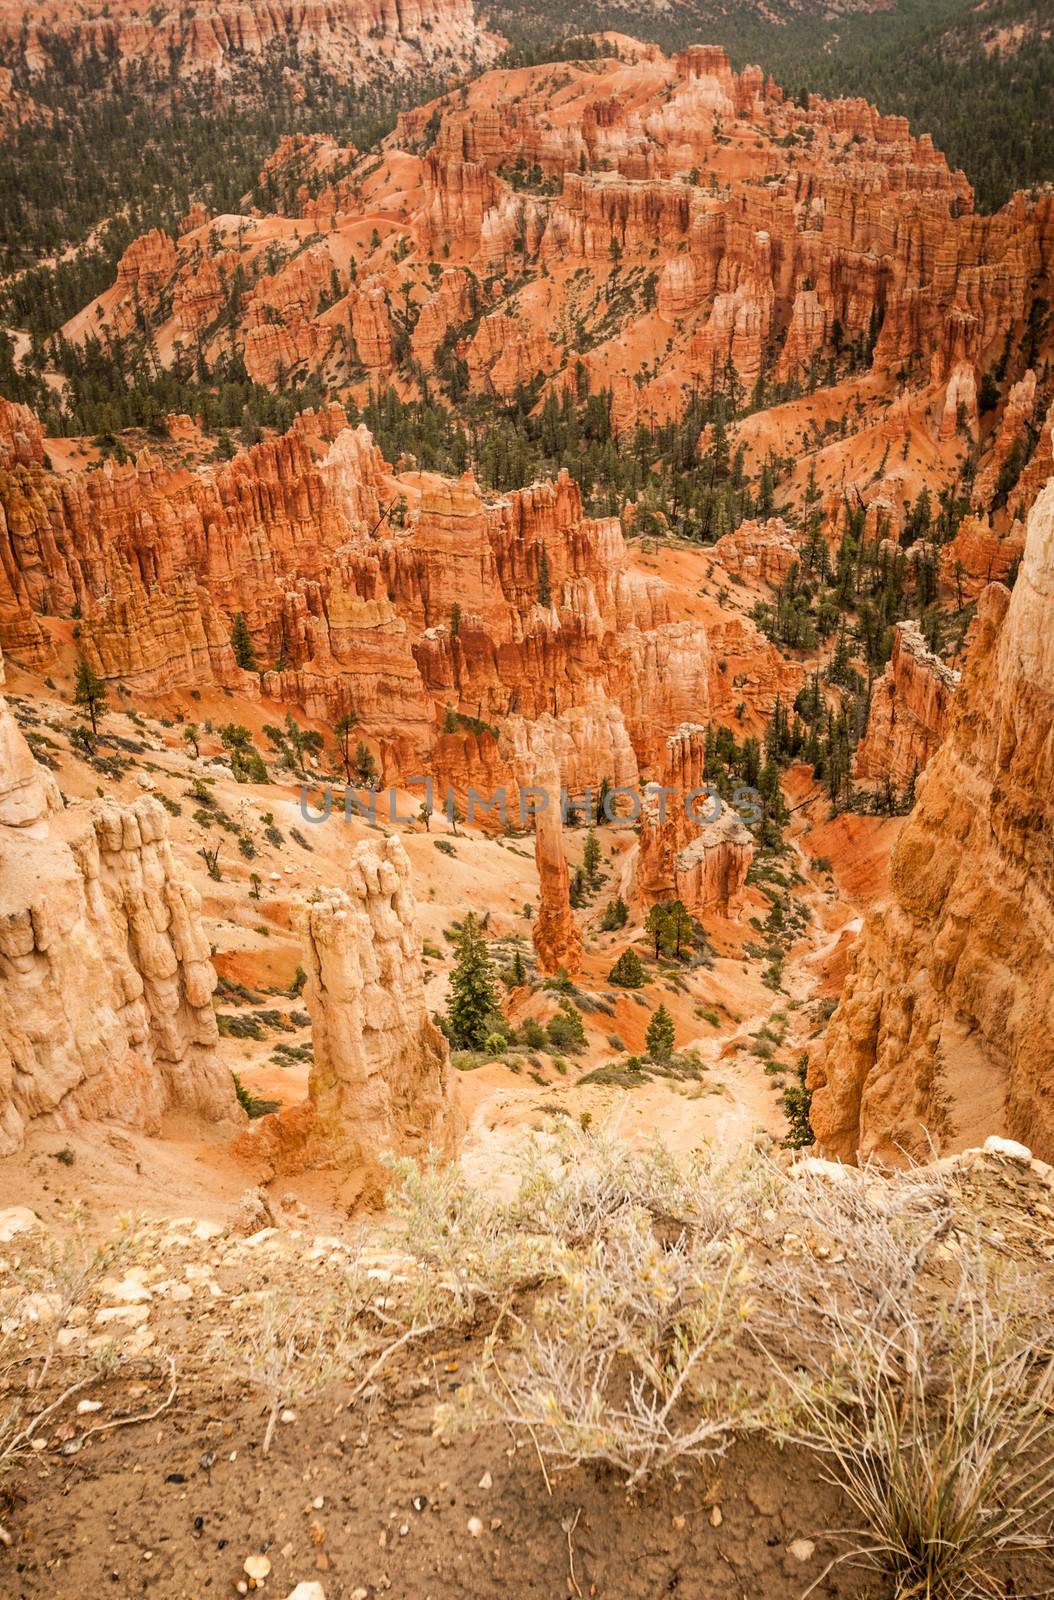 Canyon Bryce rocks and trees by weltreisendertj